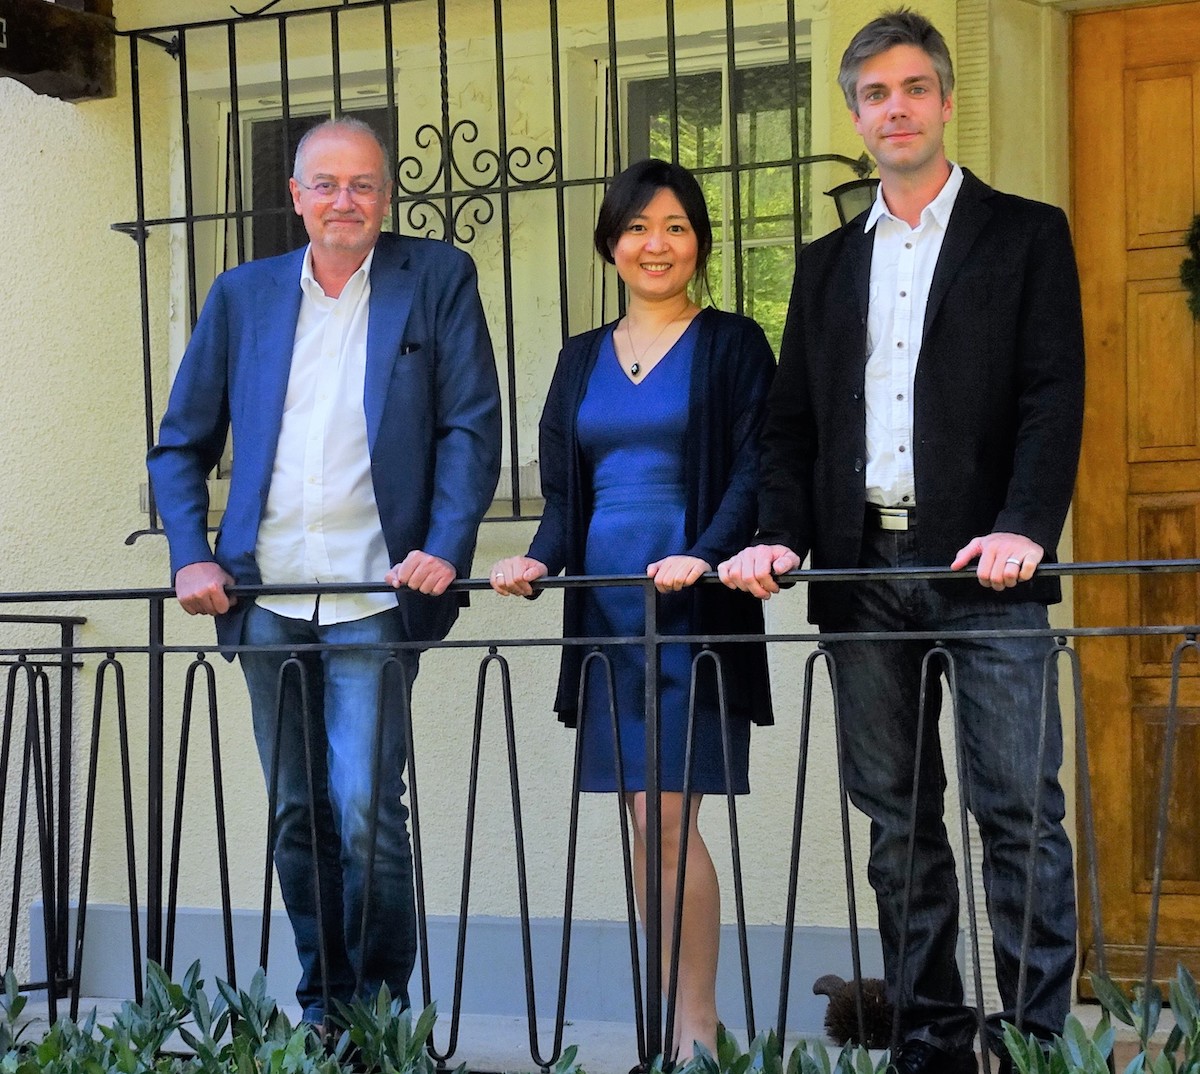 Founder team: Prof. Raymond Miralbell (left), Dr. Christina Vallgren (middle) and Dr. Marcus Palm (right).